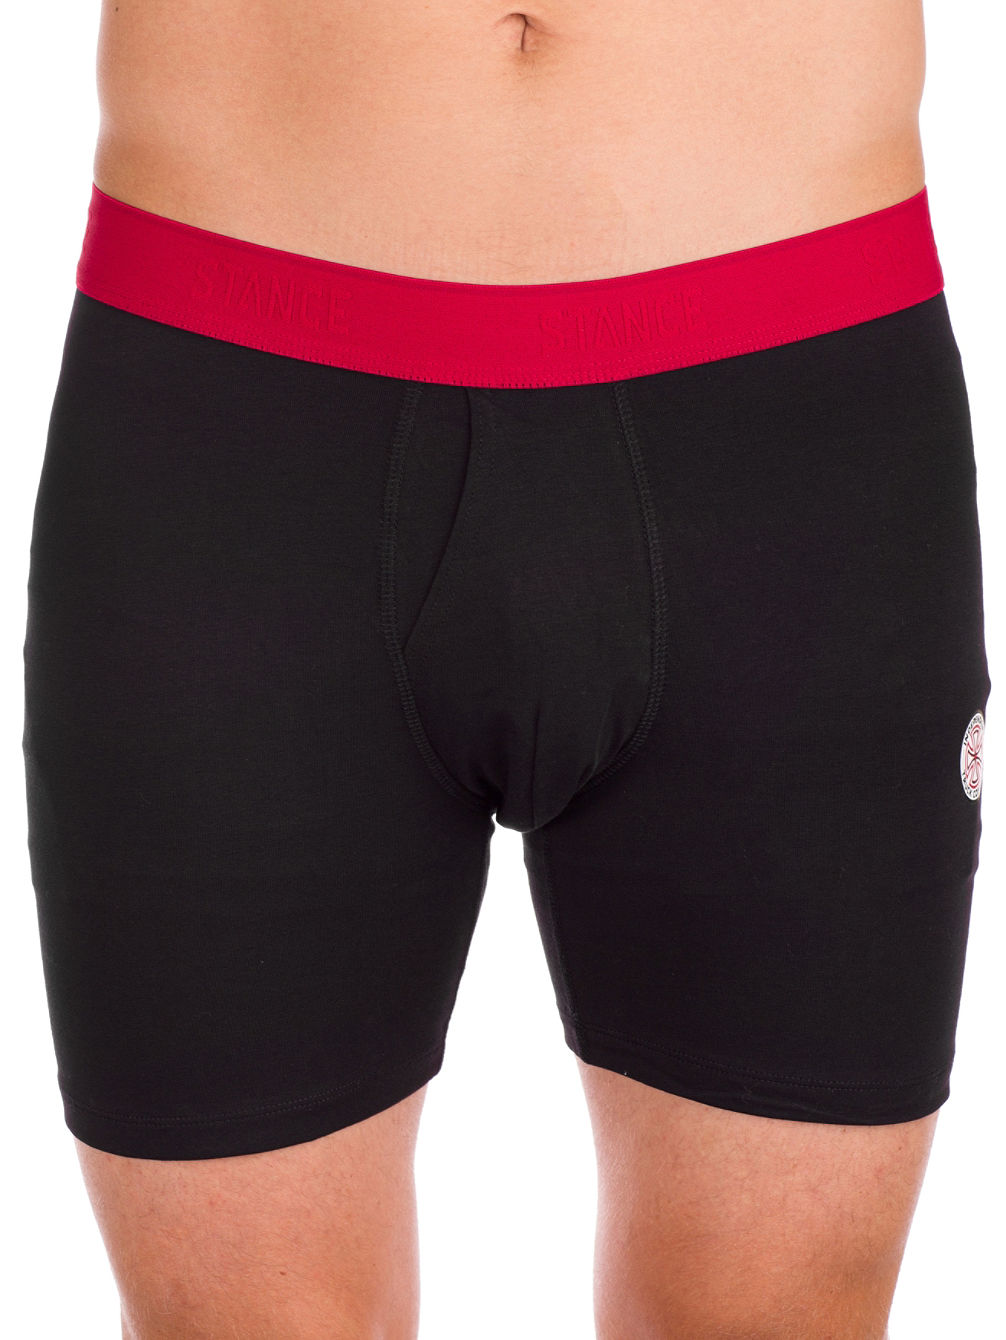 X Independent Wholester Boxershorts